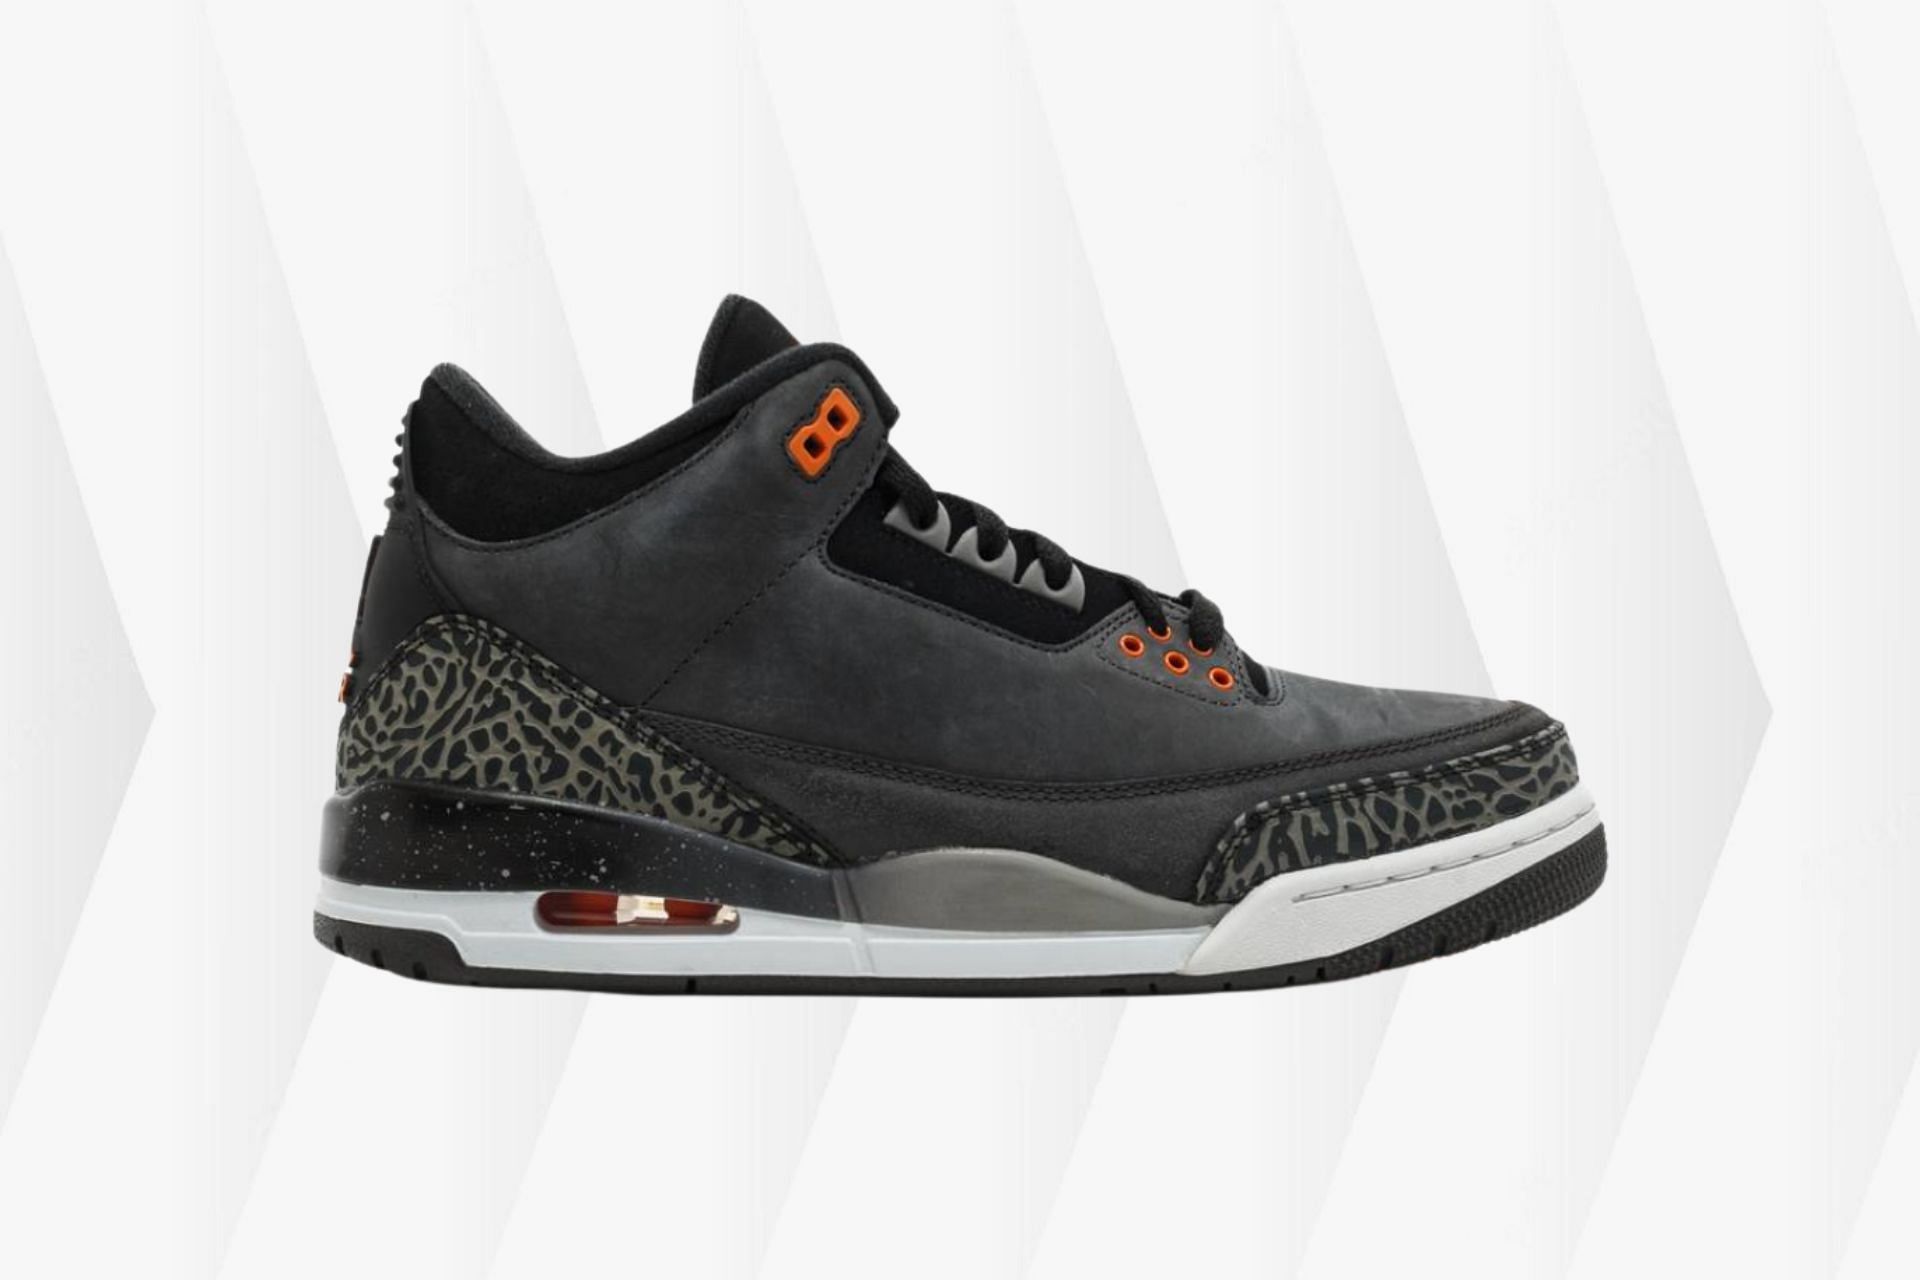 Fear: Air Jordan 3 Retro “Fear” shoes: Where to buy, price, and more ...